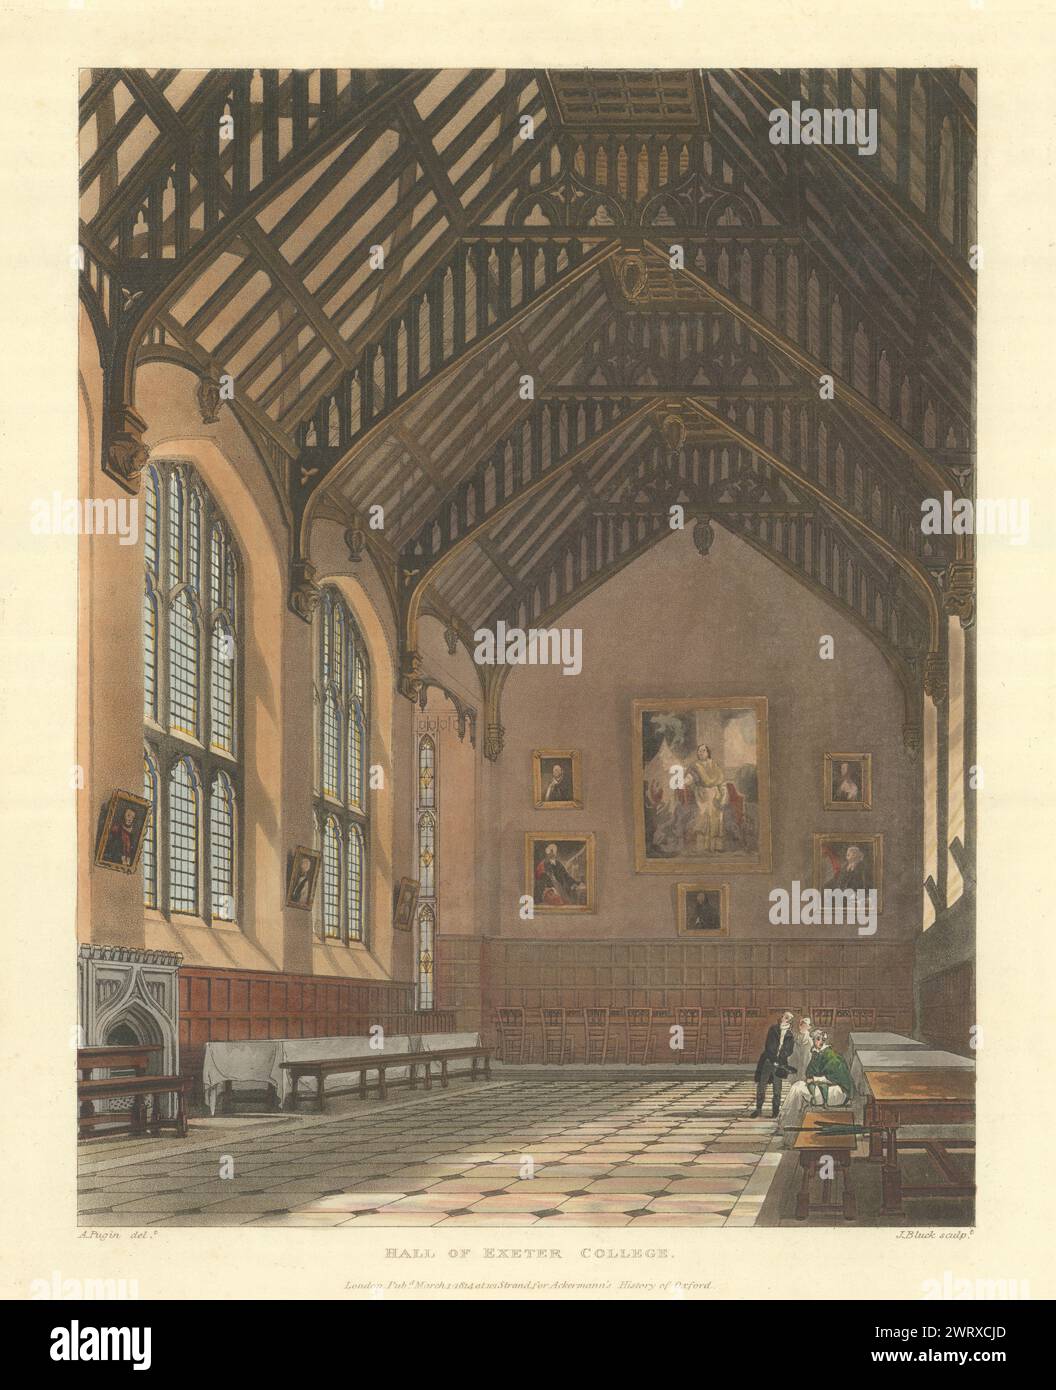 Hall of Exeter College. Ackermann's Oxford University 1814 ancienne impression antique Banque D'Images